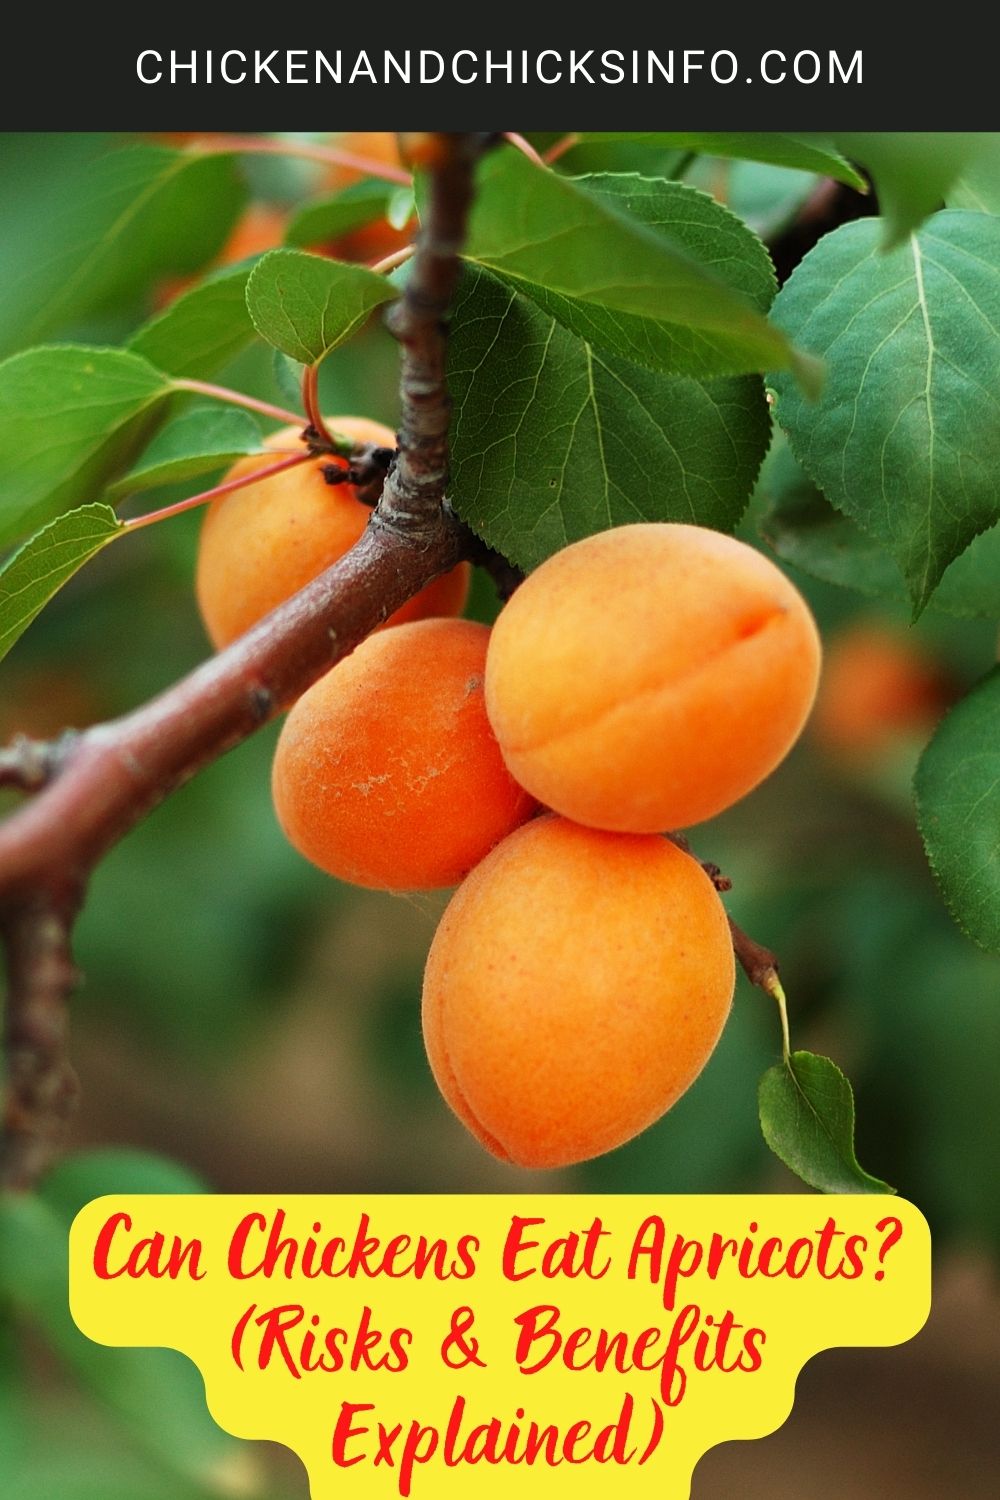 Can Chickens Eat Apricots? (Risks & Benefits Explained) poster.
